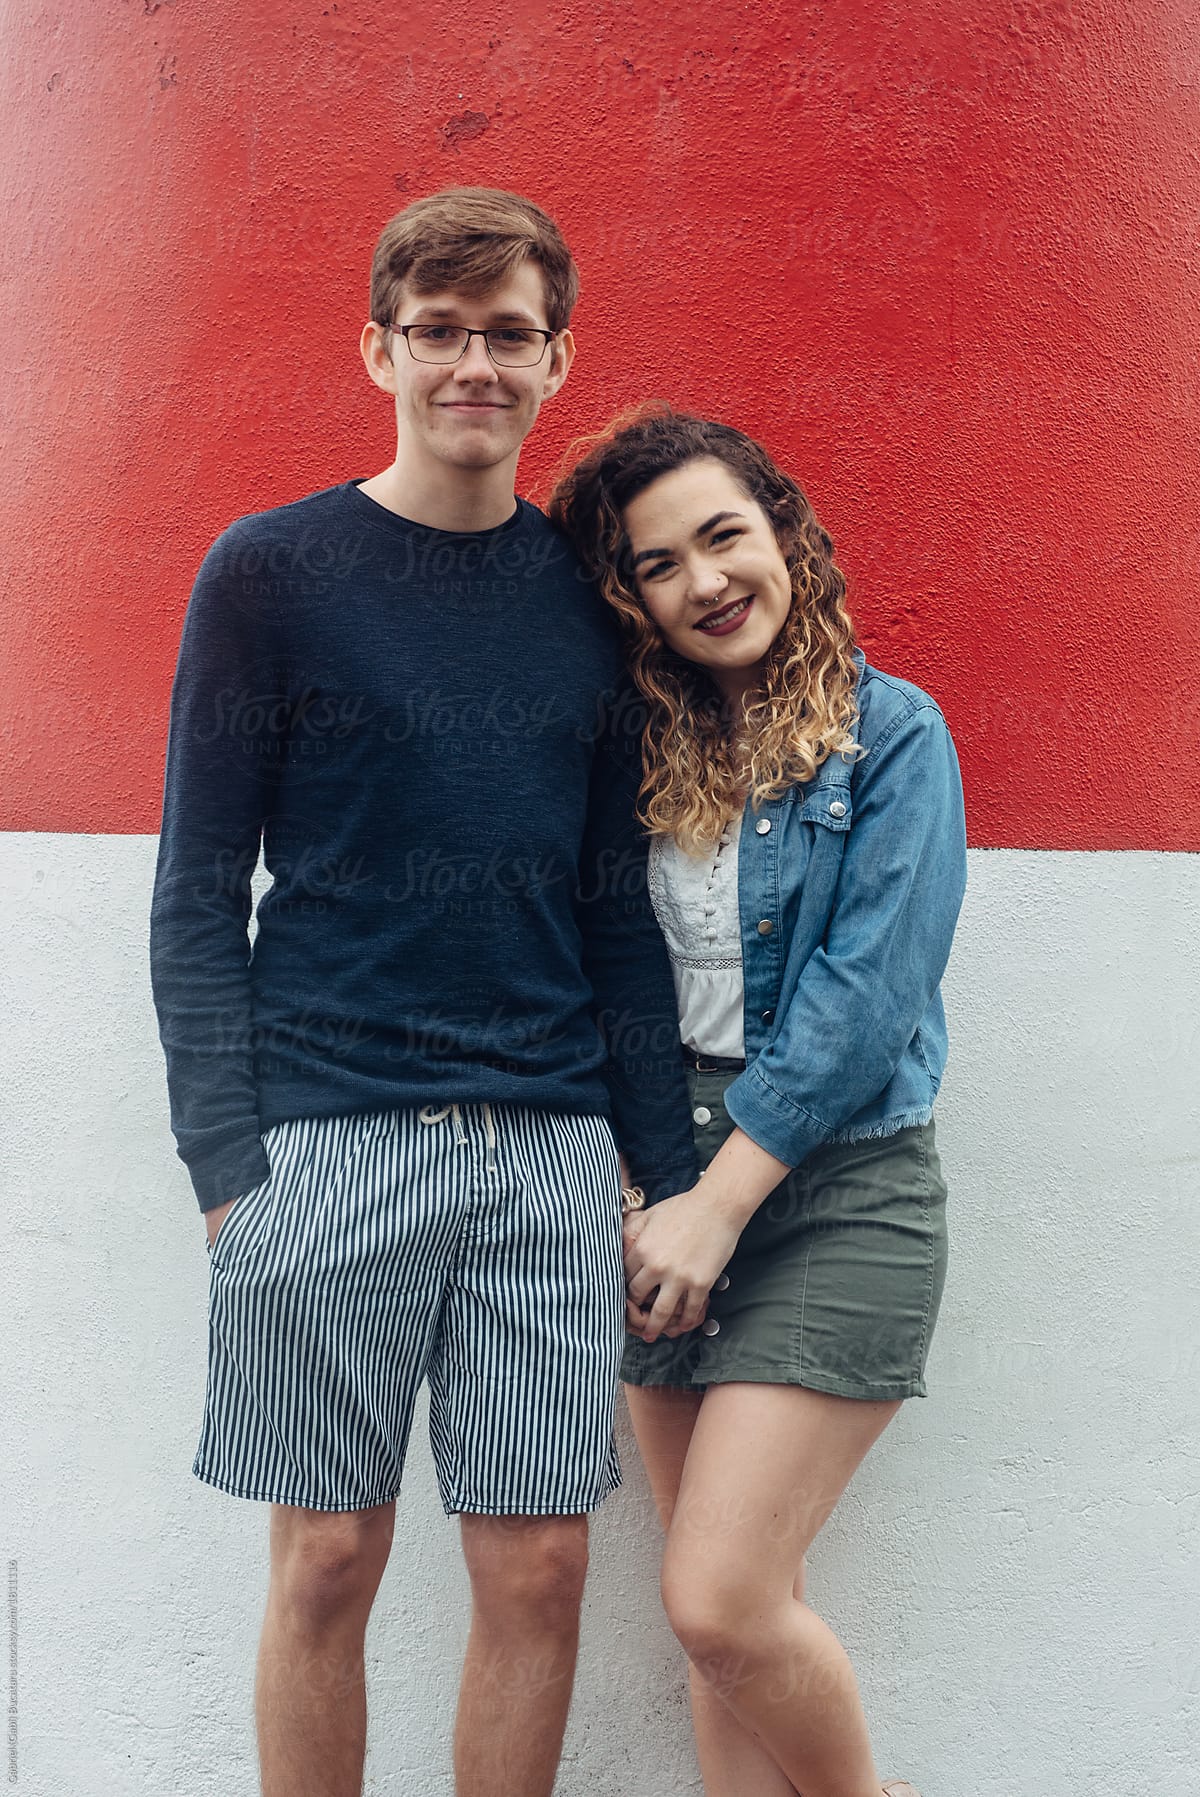 Smiling couple by a red and white wall